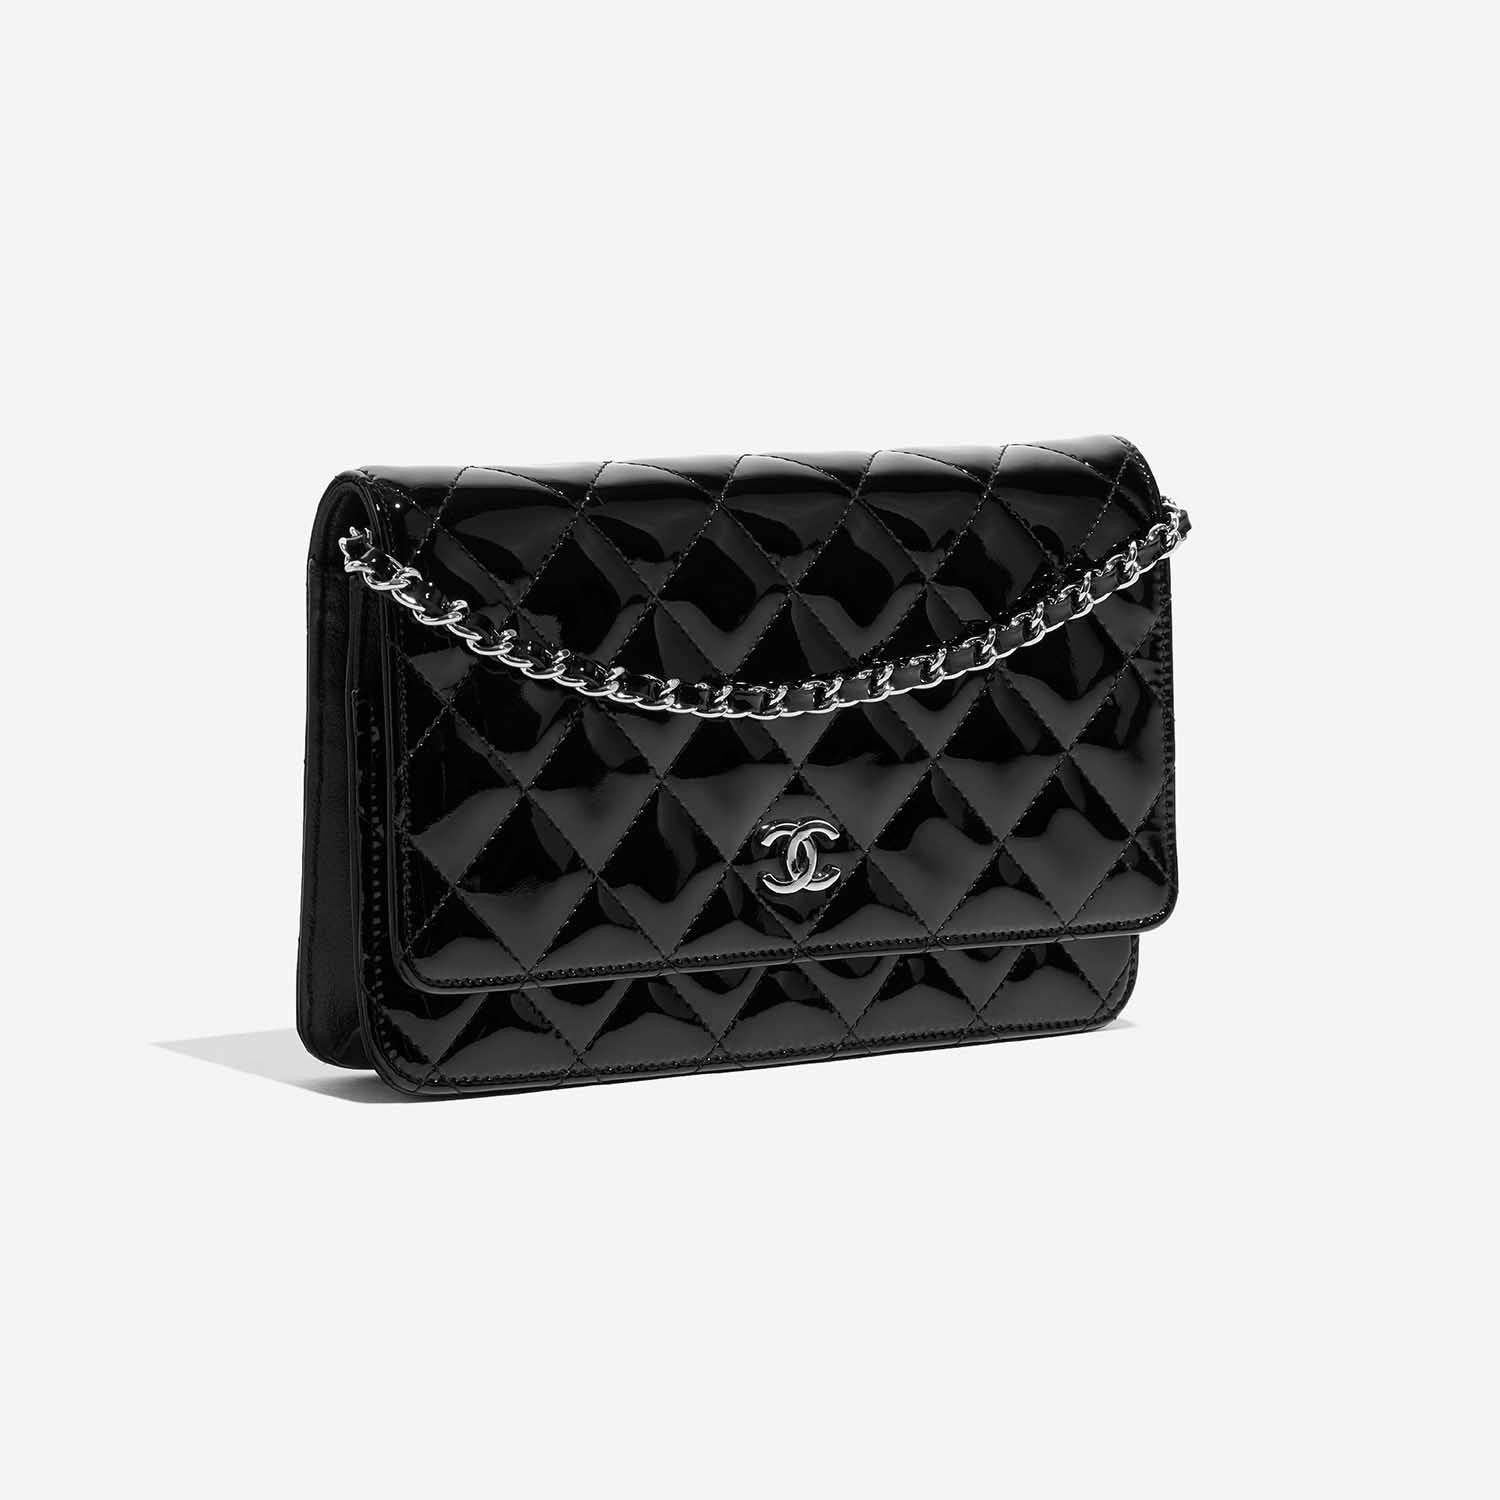 Pre-owned Chanel bag Timeless WOC Patent Leather Black Black Side Front | Sell your designer bag on Saclab.com